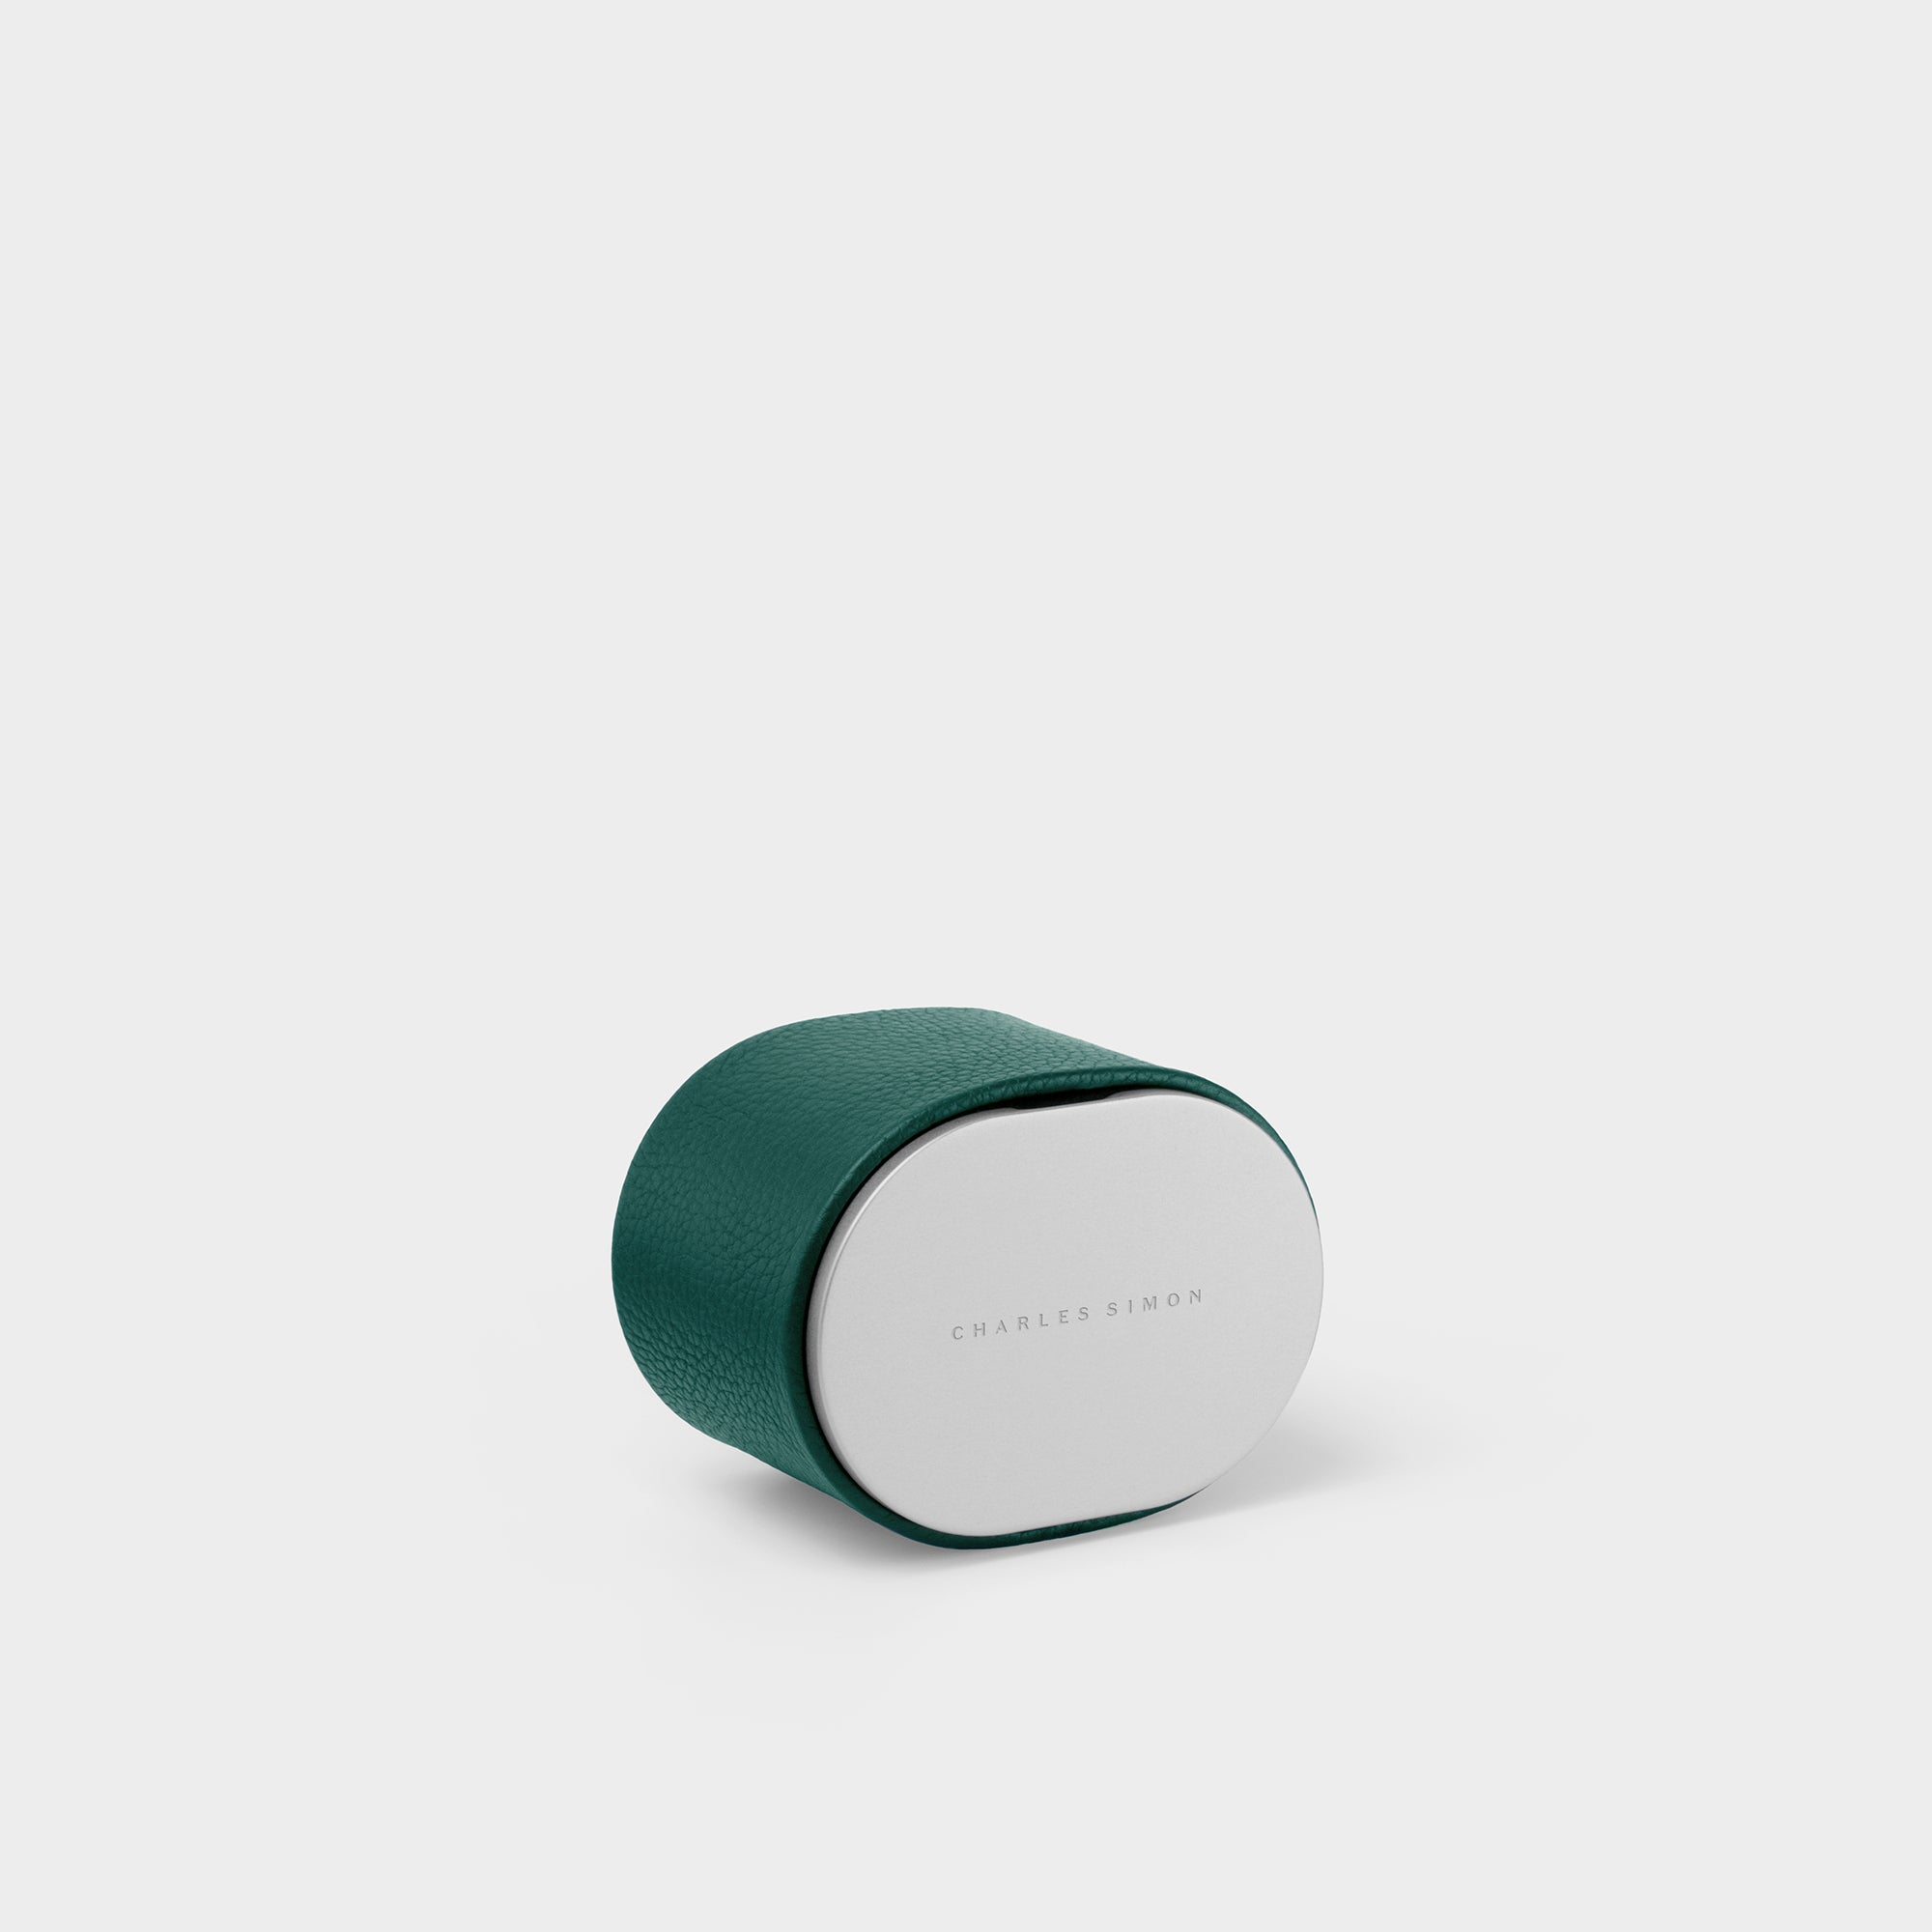 Closed emerald leather Theo handmade watch roll by Charles Simon